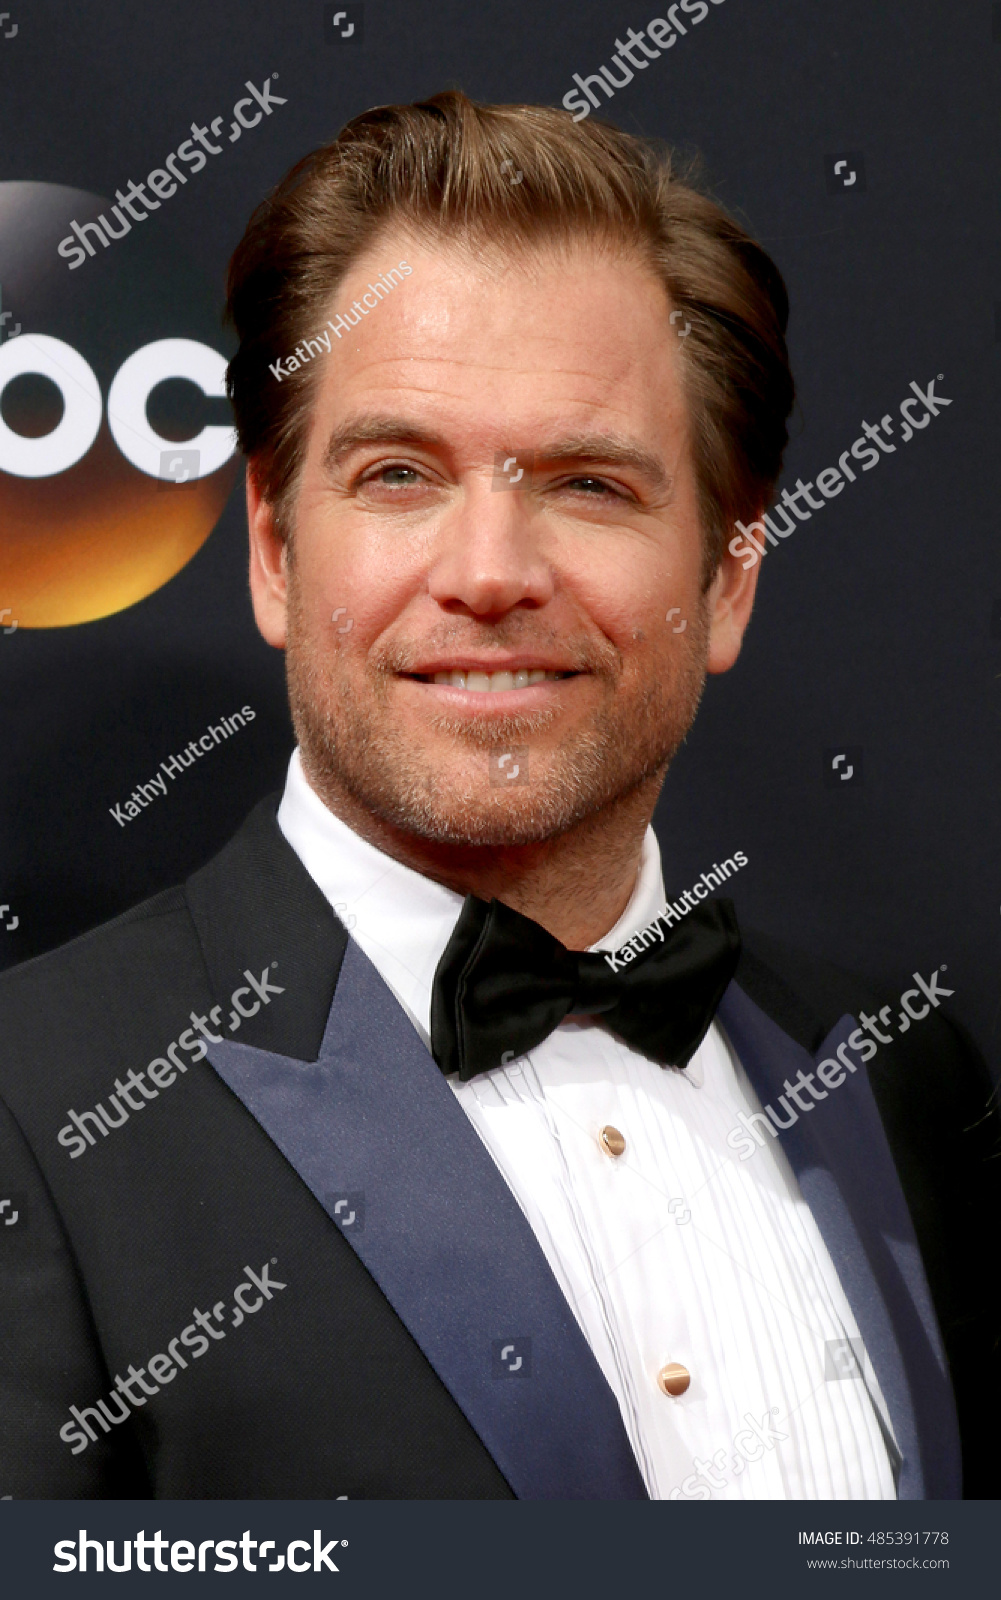 Michael weatherly Images, Stock Photos & Vectors | Shutterstock